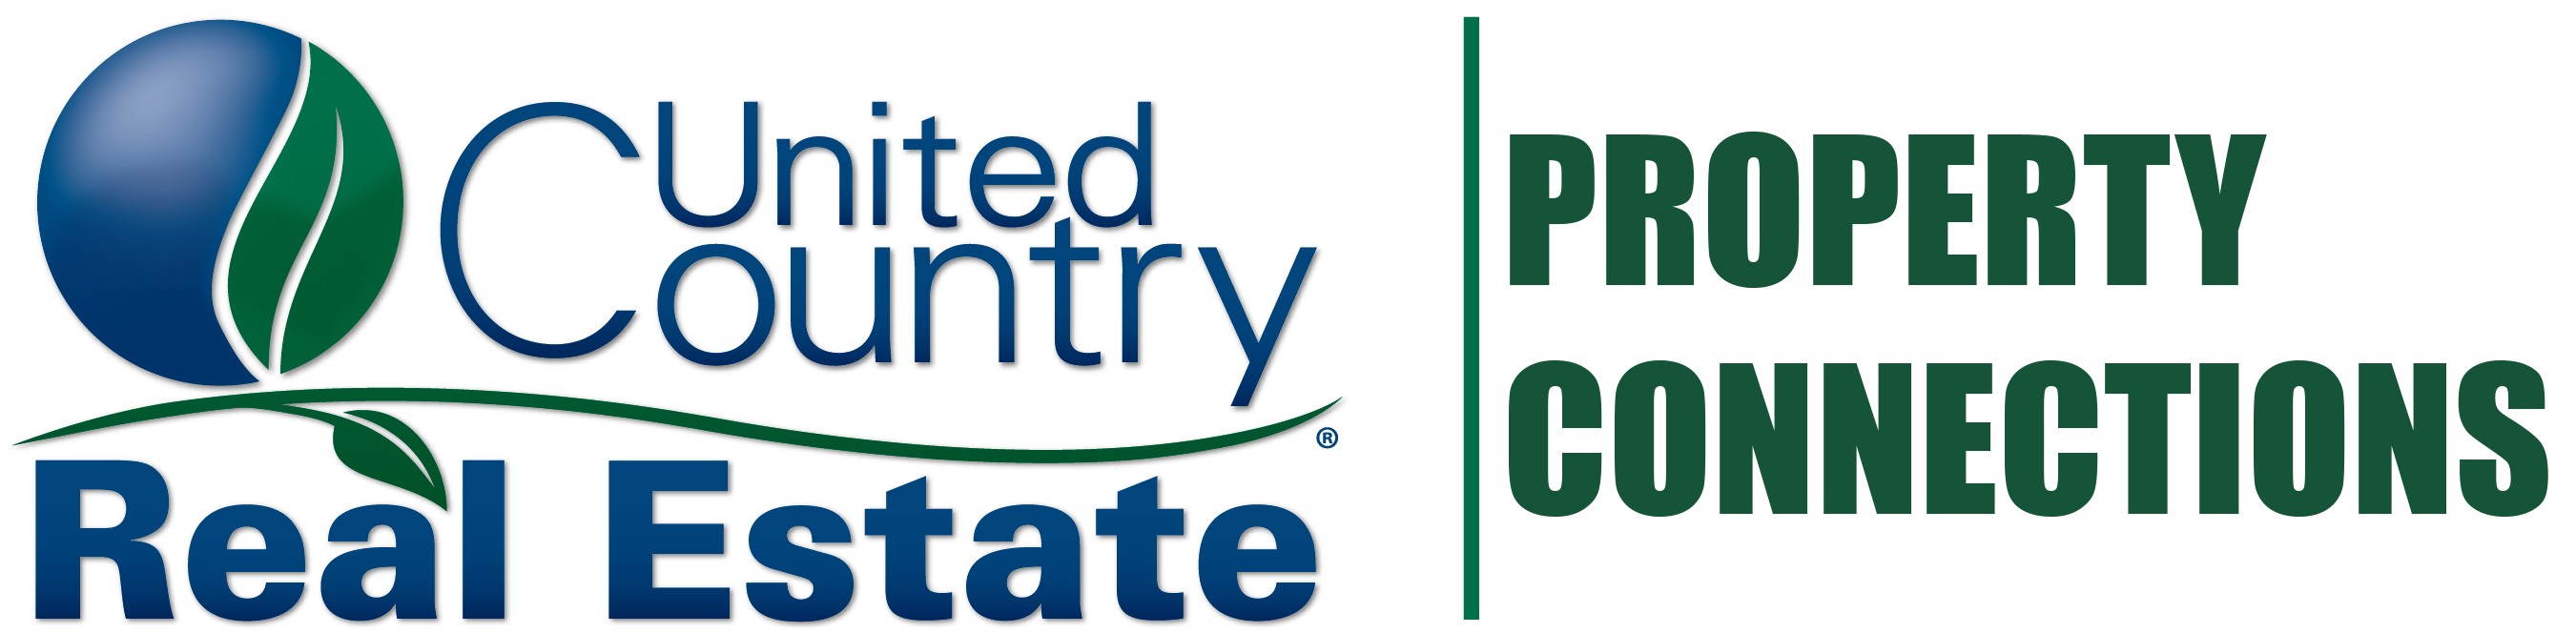 Jeff Pratt - United Country Real Estate | Property Connections